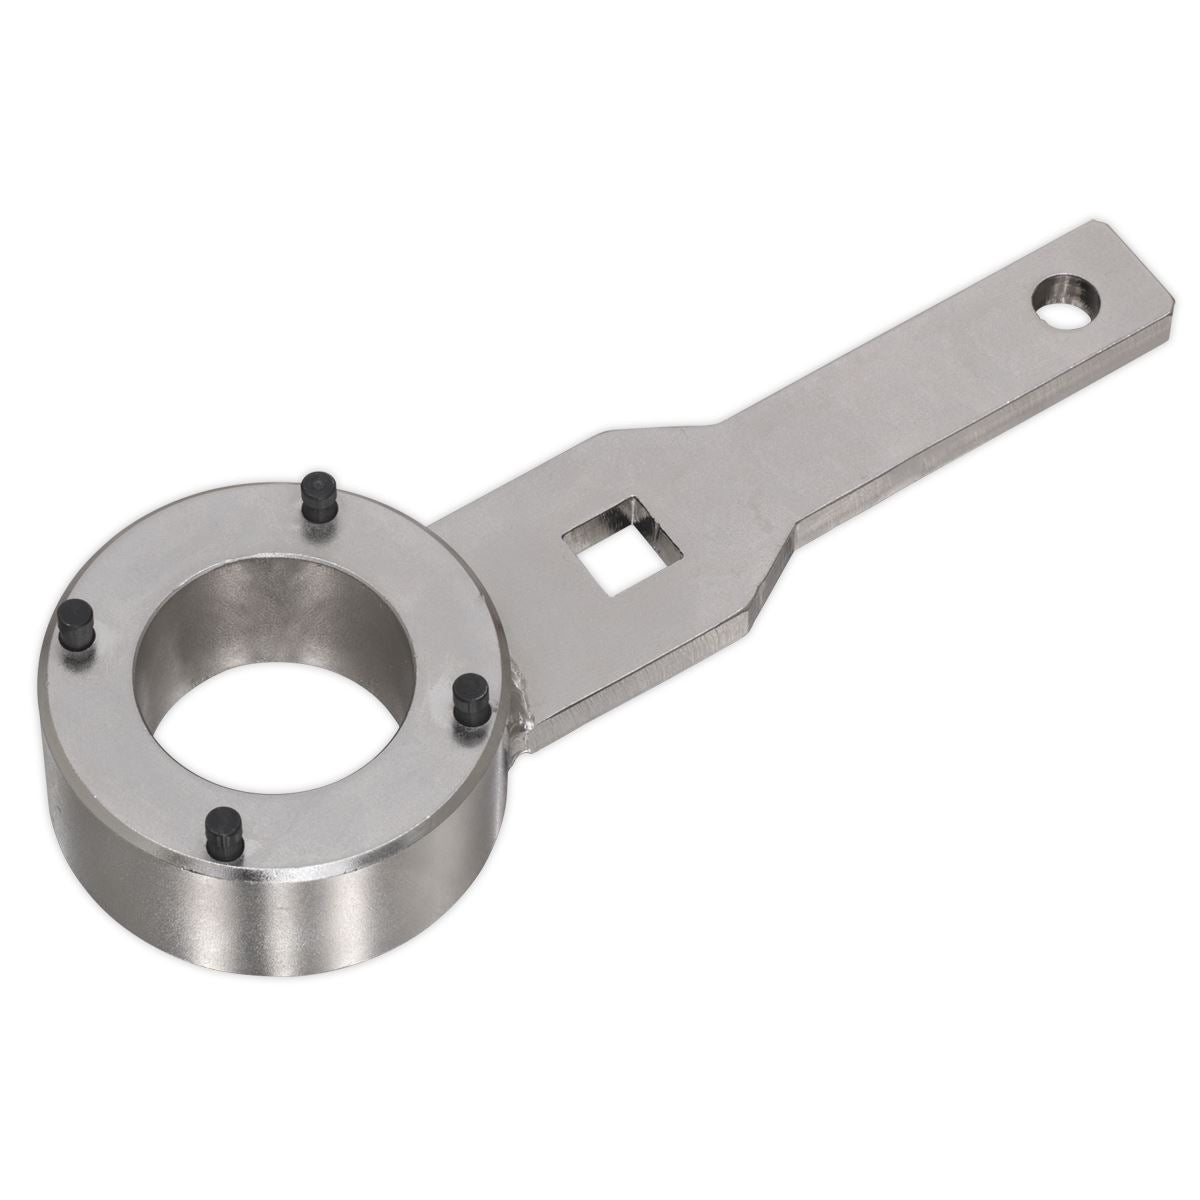 Sealey Crankshaft Pulley Holding Wrench - VAG 1.8/2.0 TFSi - Chain Drive